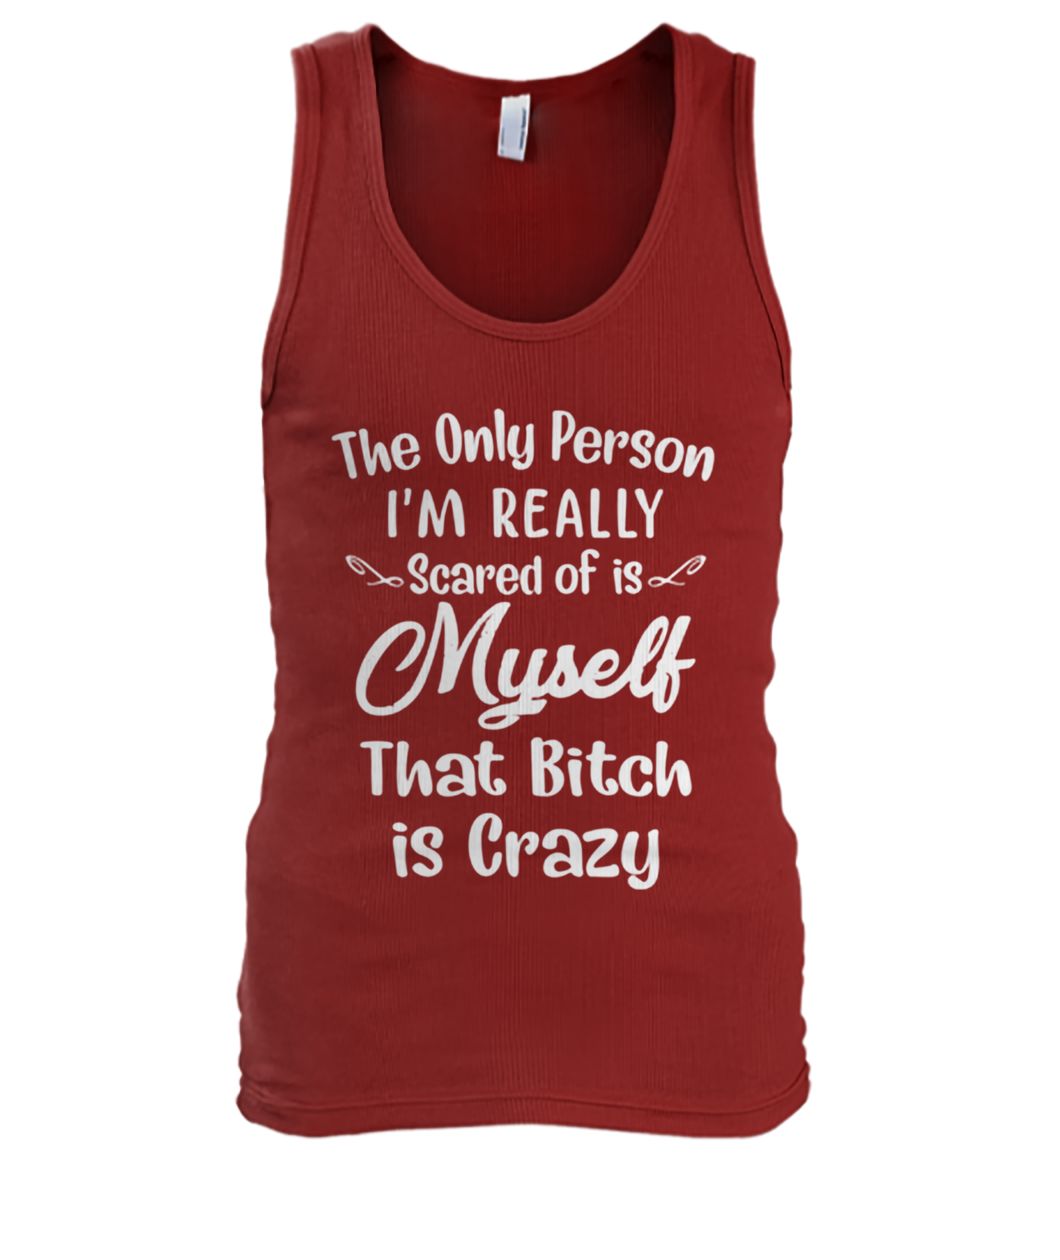 The only person I'm really scared of is myself that bitch is crazy men's tank top